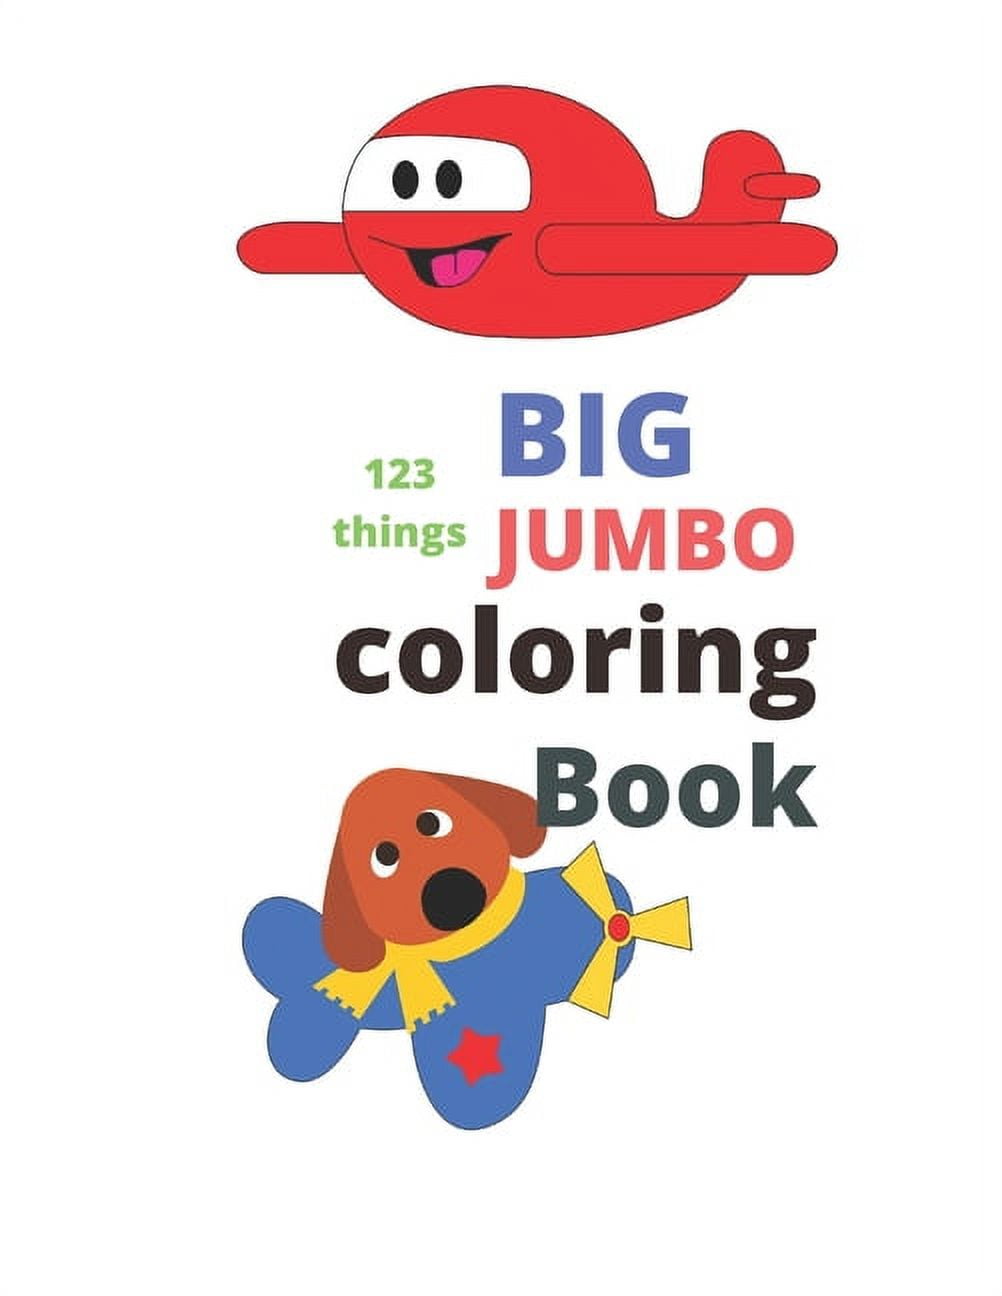 Giant Coloring Book for Kids: Coloring Books for Kids: A Jumbo Coloring Book  for Children Activity Books. for Kids Ages 4-8 (Paperback)